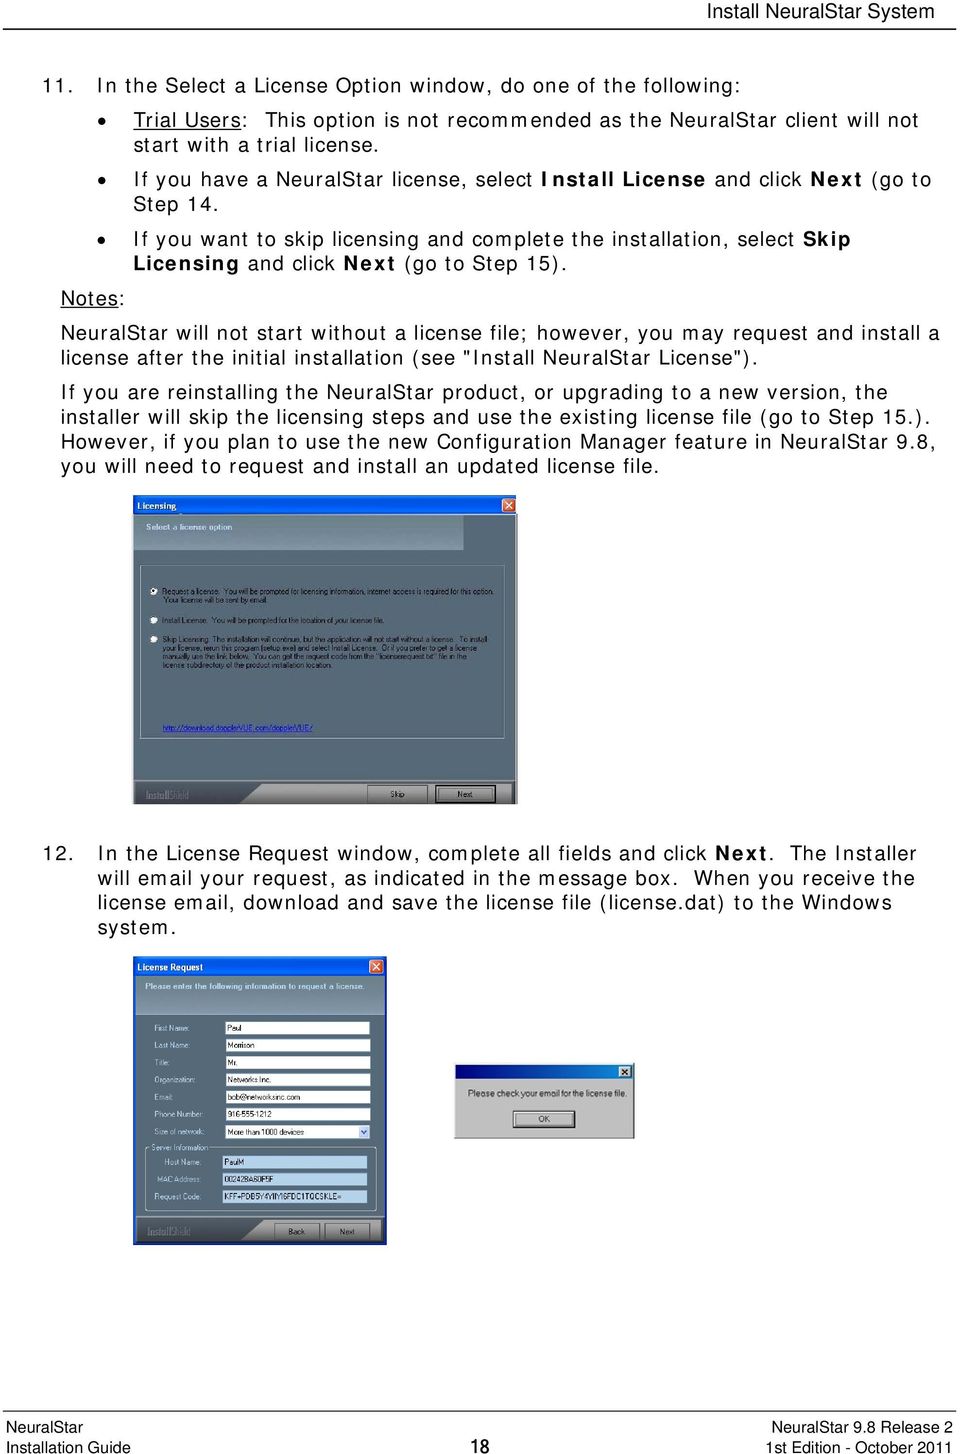 If you have a NeuralStar license, select Install License and click Next (go to Step 14.